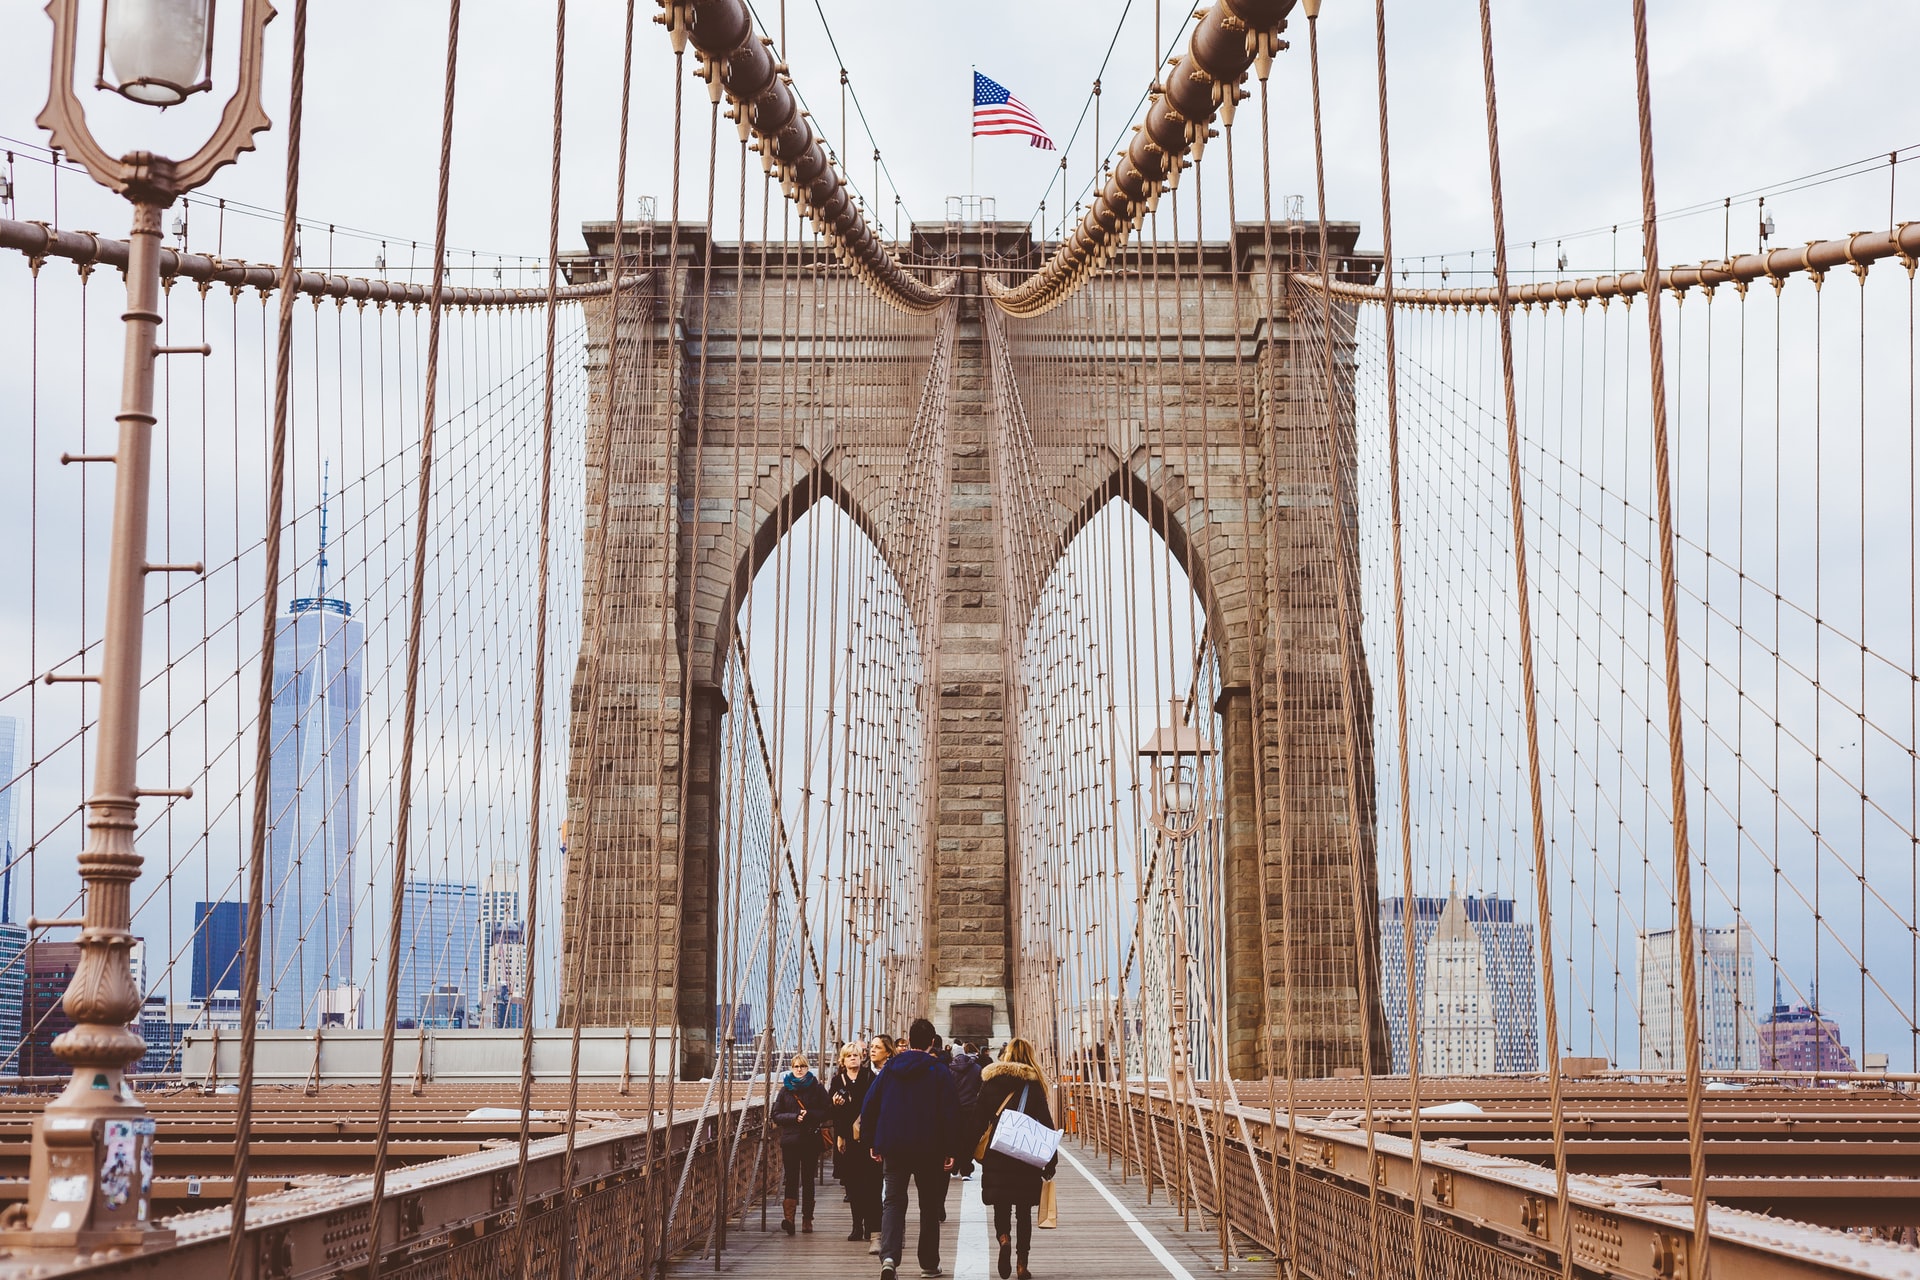 new york old bridge (10 interesting facts about new york in 2022)